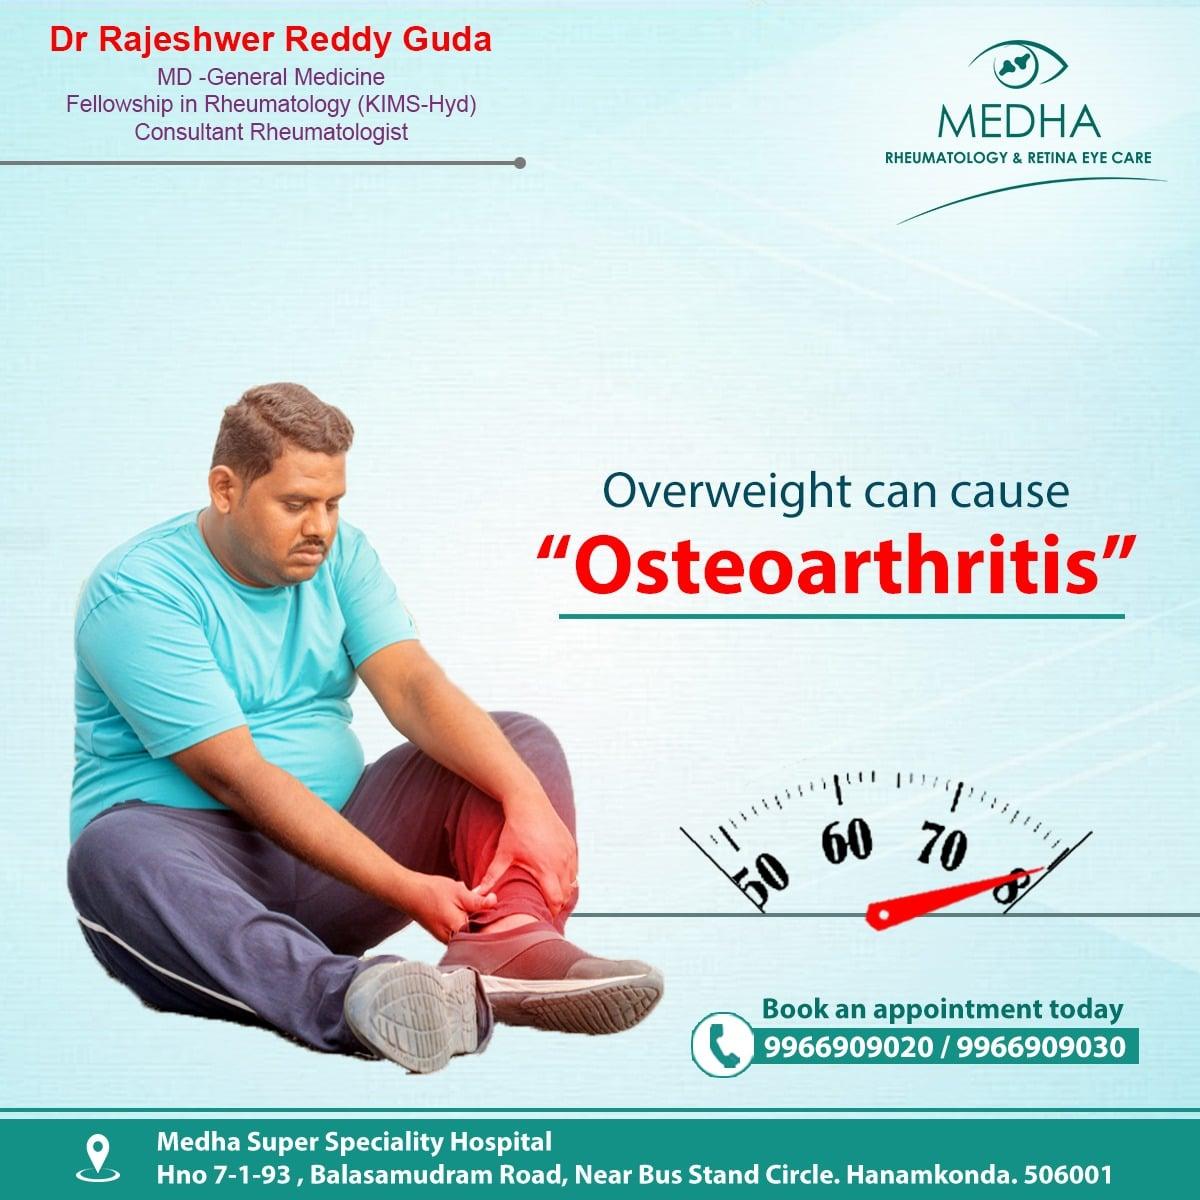 Overweight can cause "OSTEOARTHRITIS"